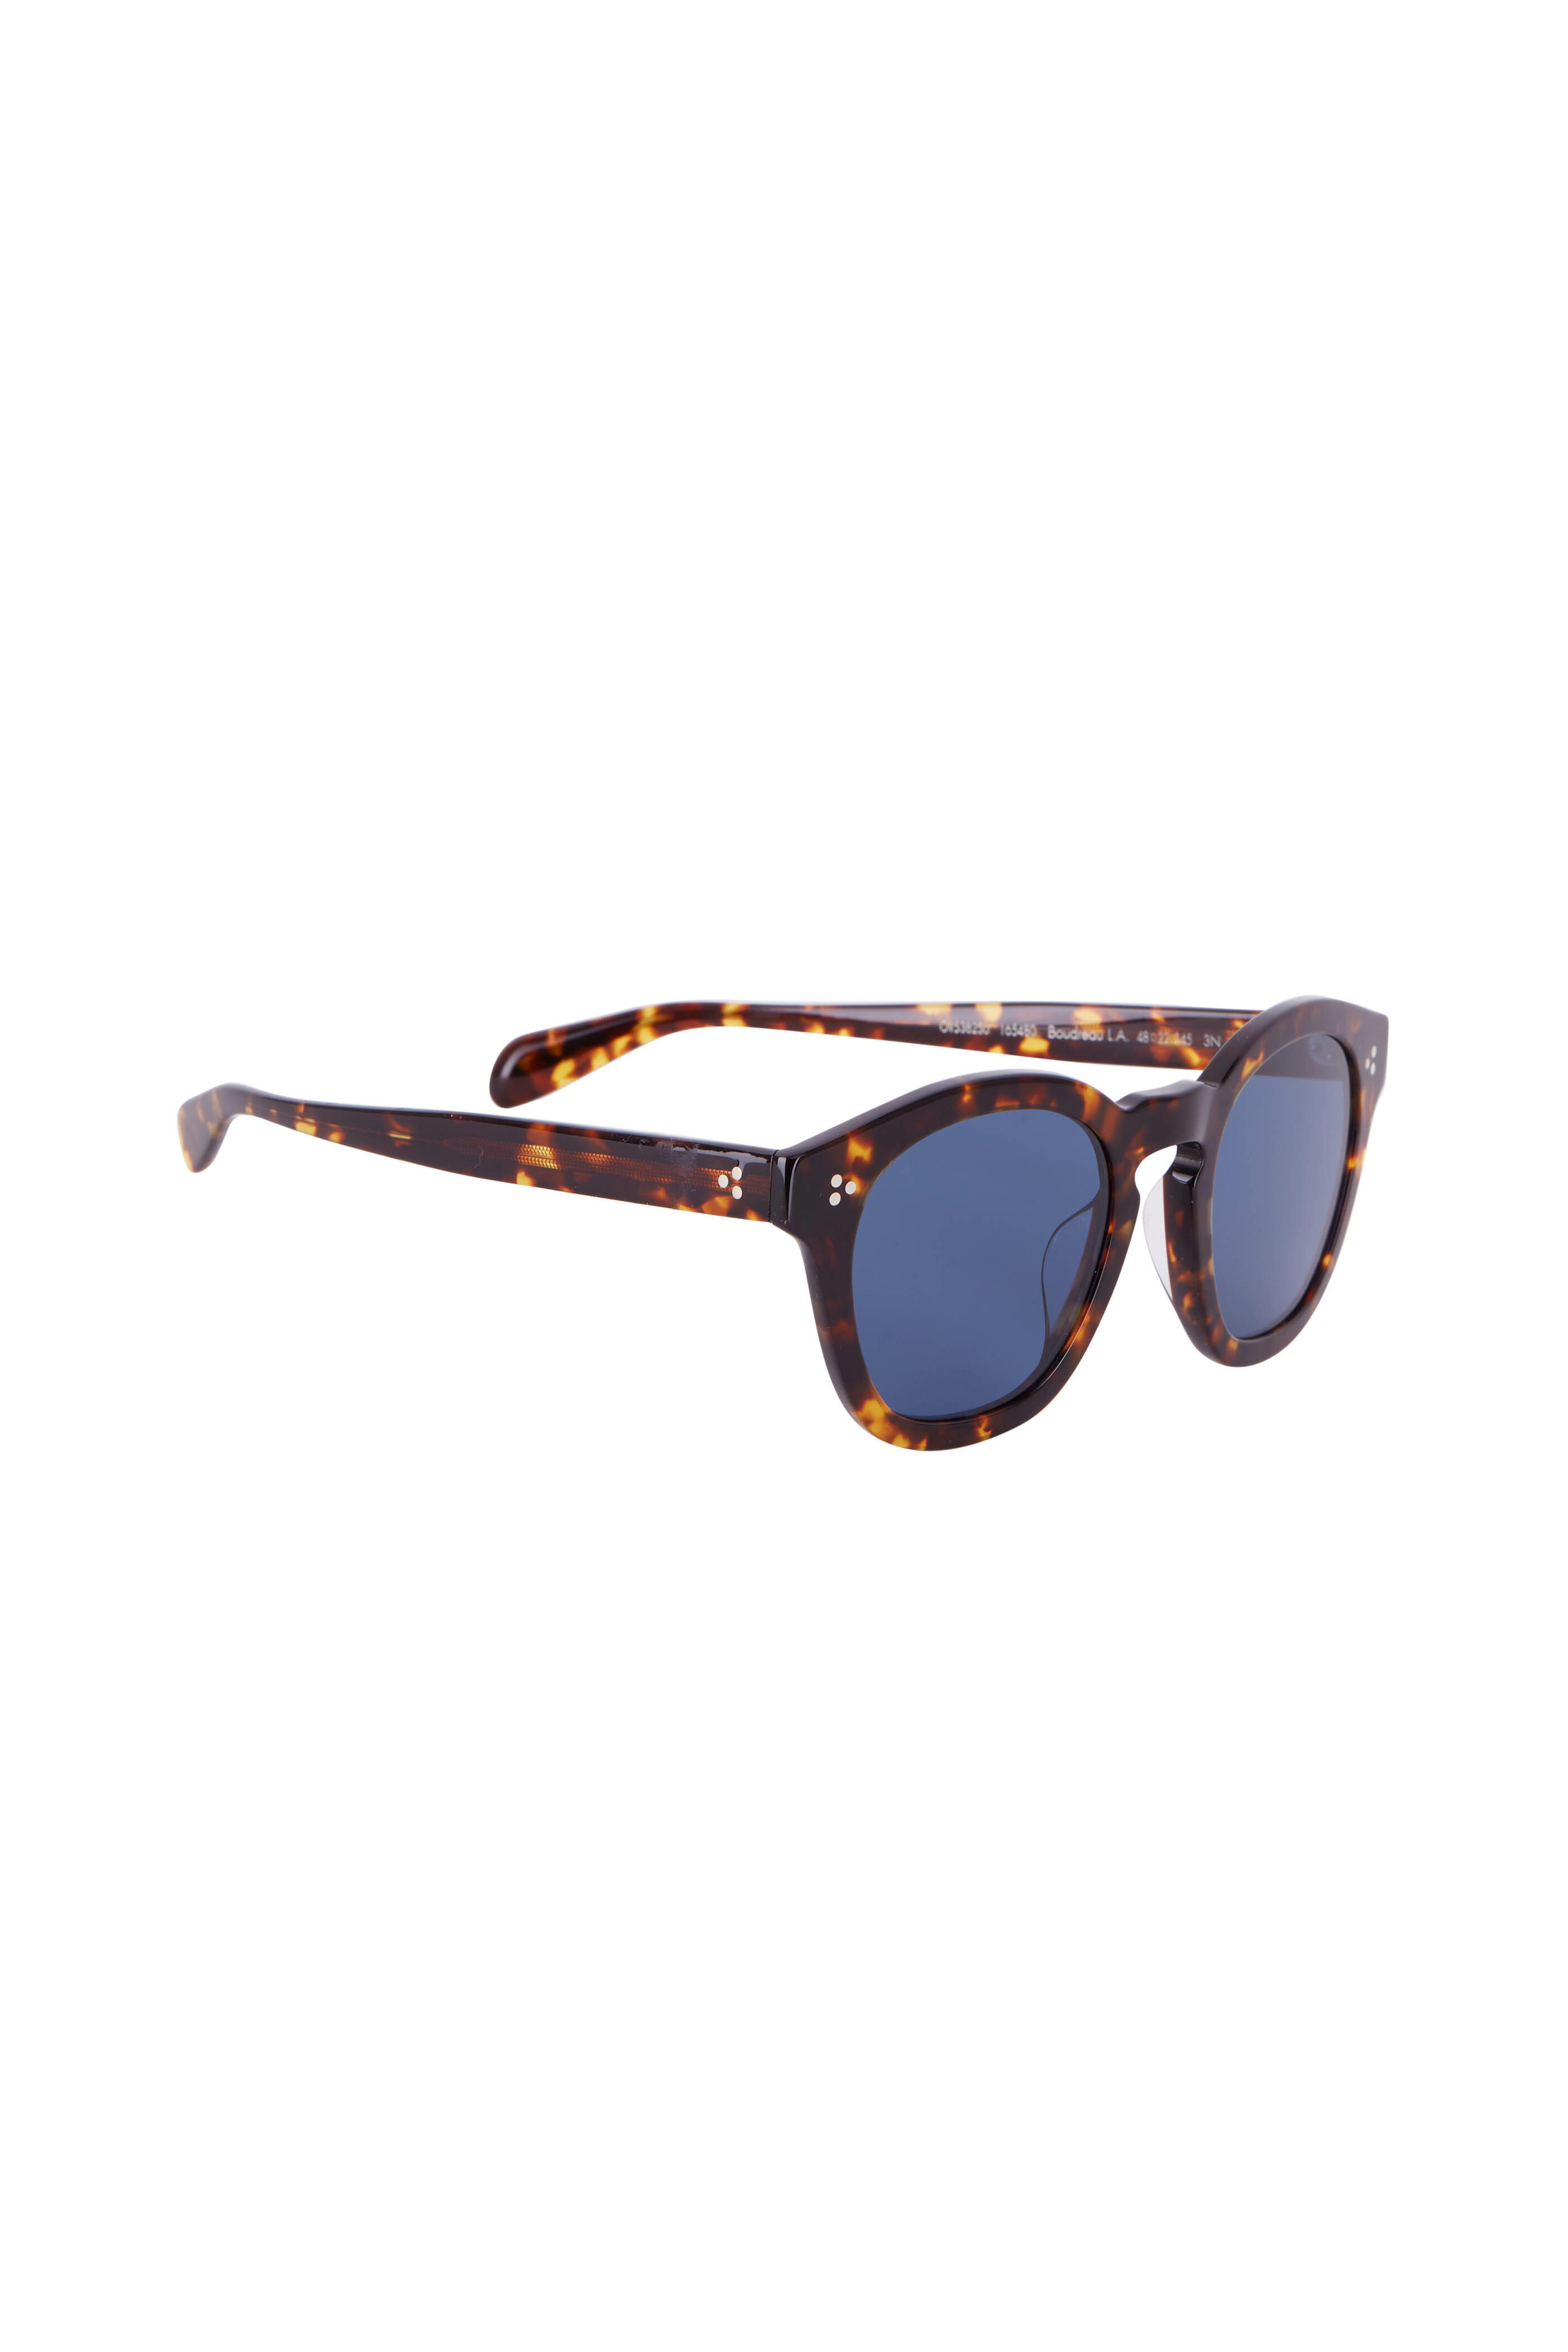 Oliver Peoples - Boudreau . DM2 Sunglasses | Mitchell Stores